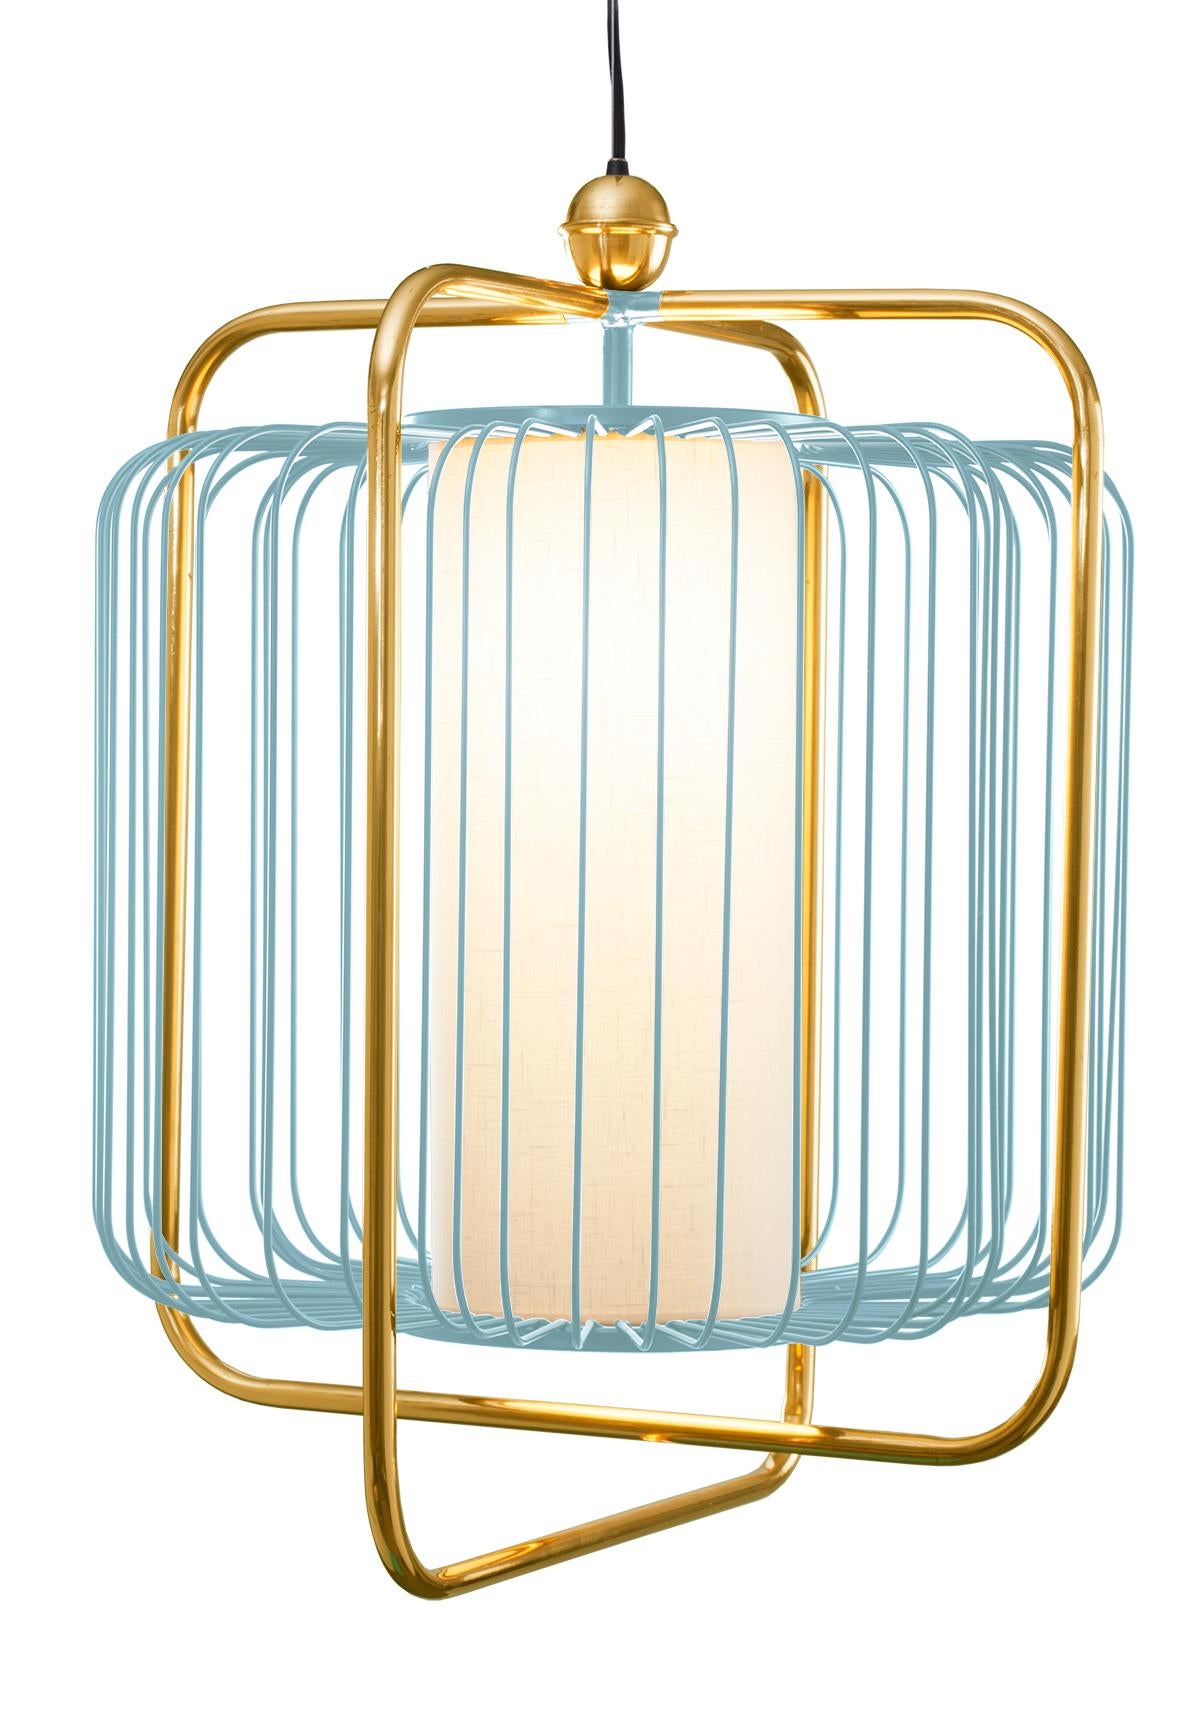 Contemporary Art Deco inspired Jules Pendant Lamp in Brass and Black For Sale 3